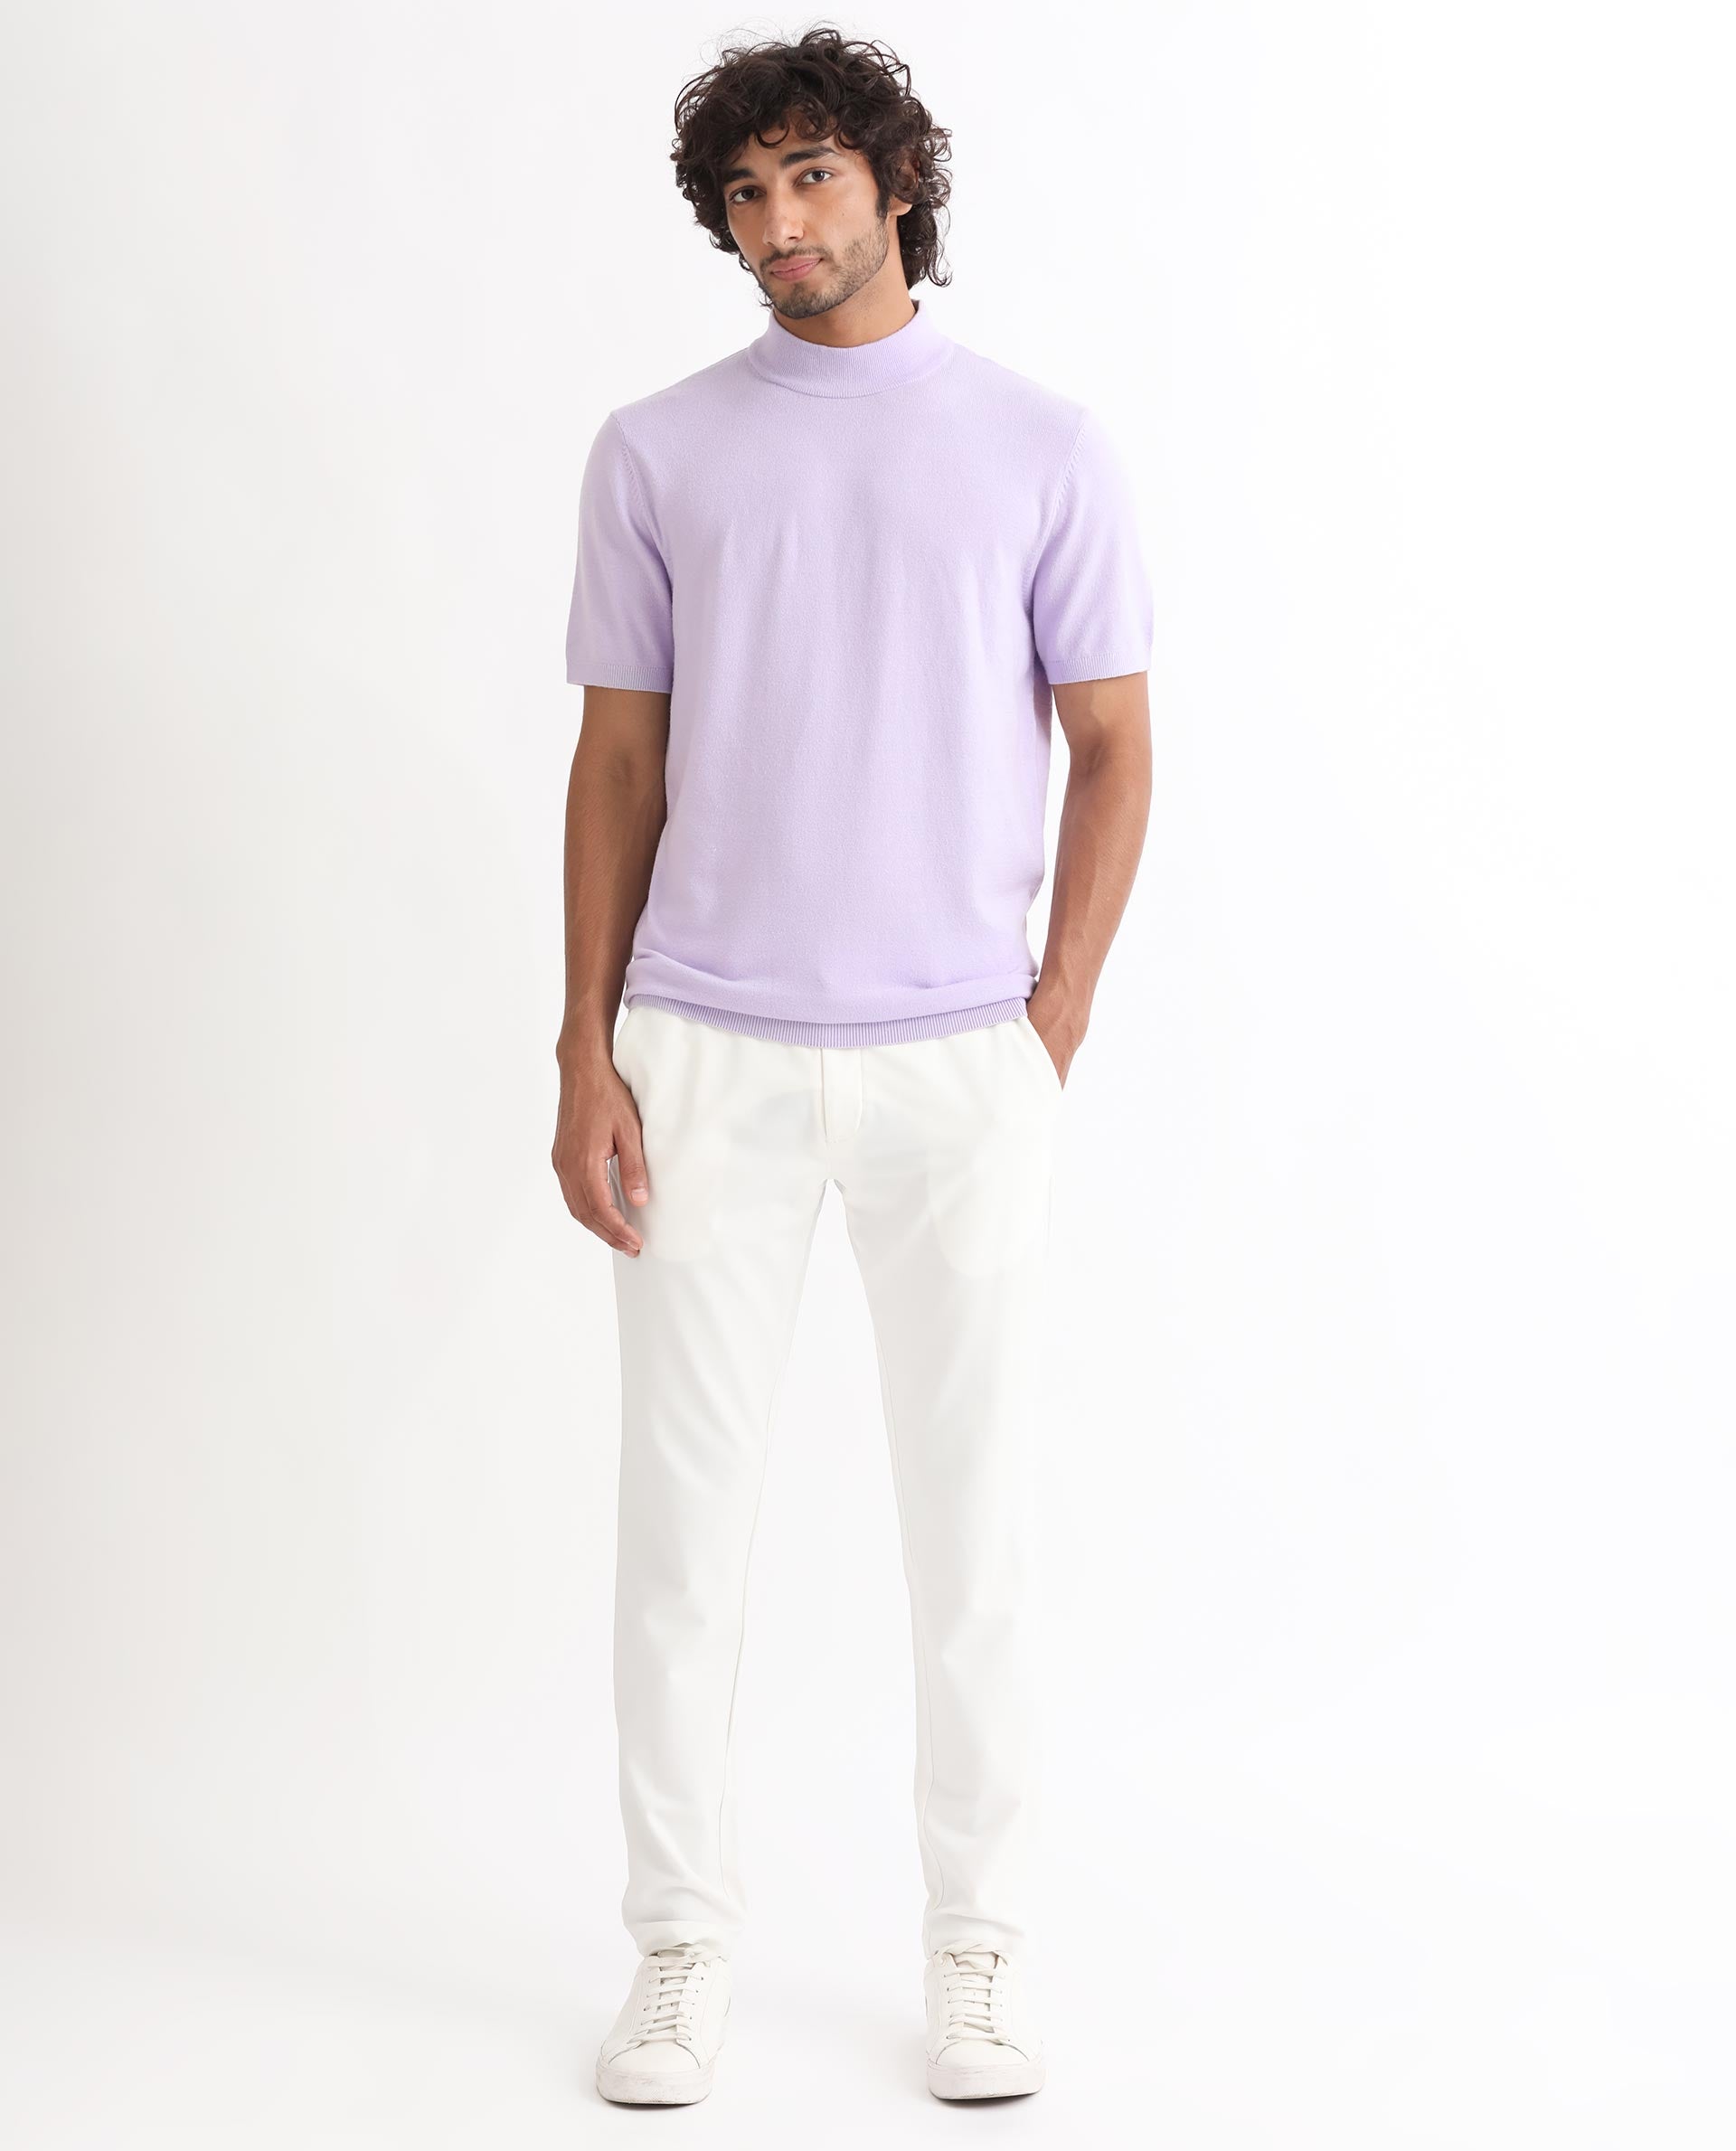 Purple Cotton Shirt For Men in Phagwara at best price by Svsn Garments -  Justdial